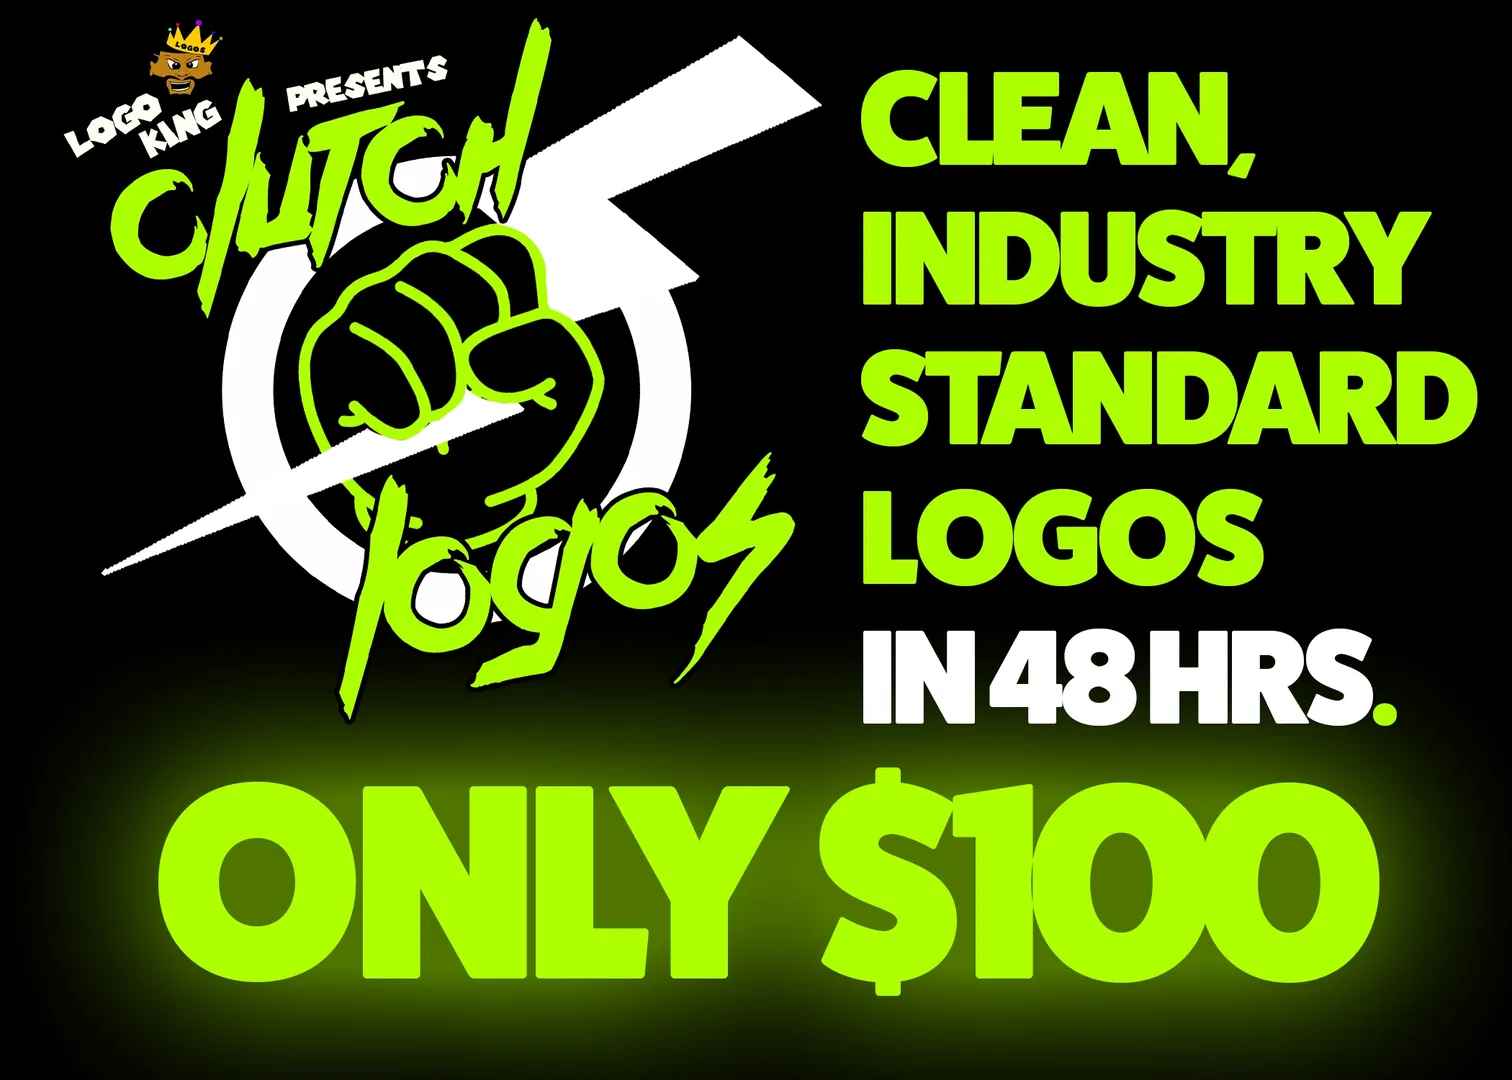 LOOKING TO GET A QUICK, INDUSTRY LVL LOGO DESIGNED? HERE IS YOUR CHANCE! RUNNING THIS SPECIAL FOR SEPTEMBER ONLY! CONTACT ME TODAY!